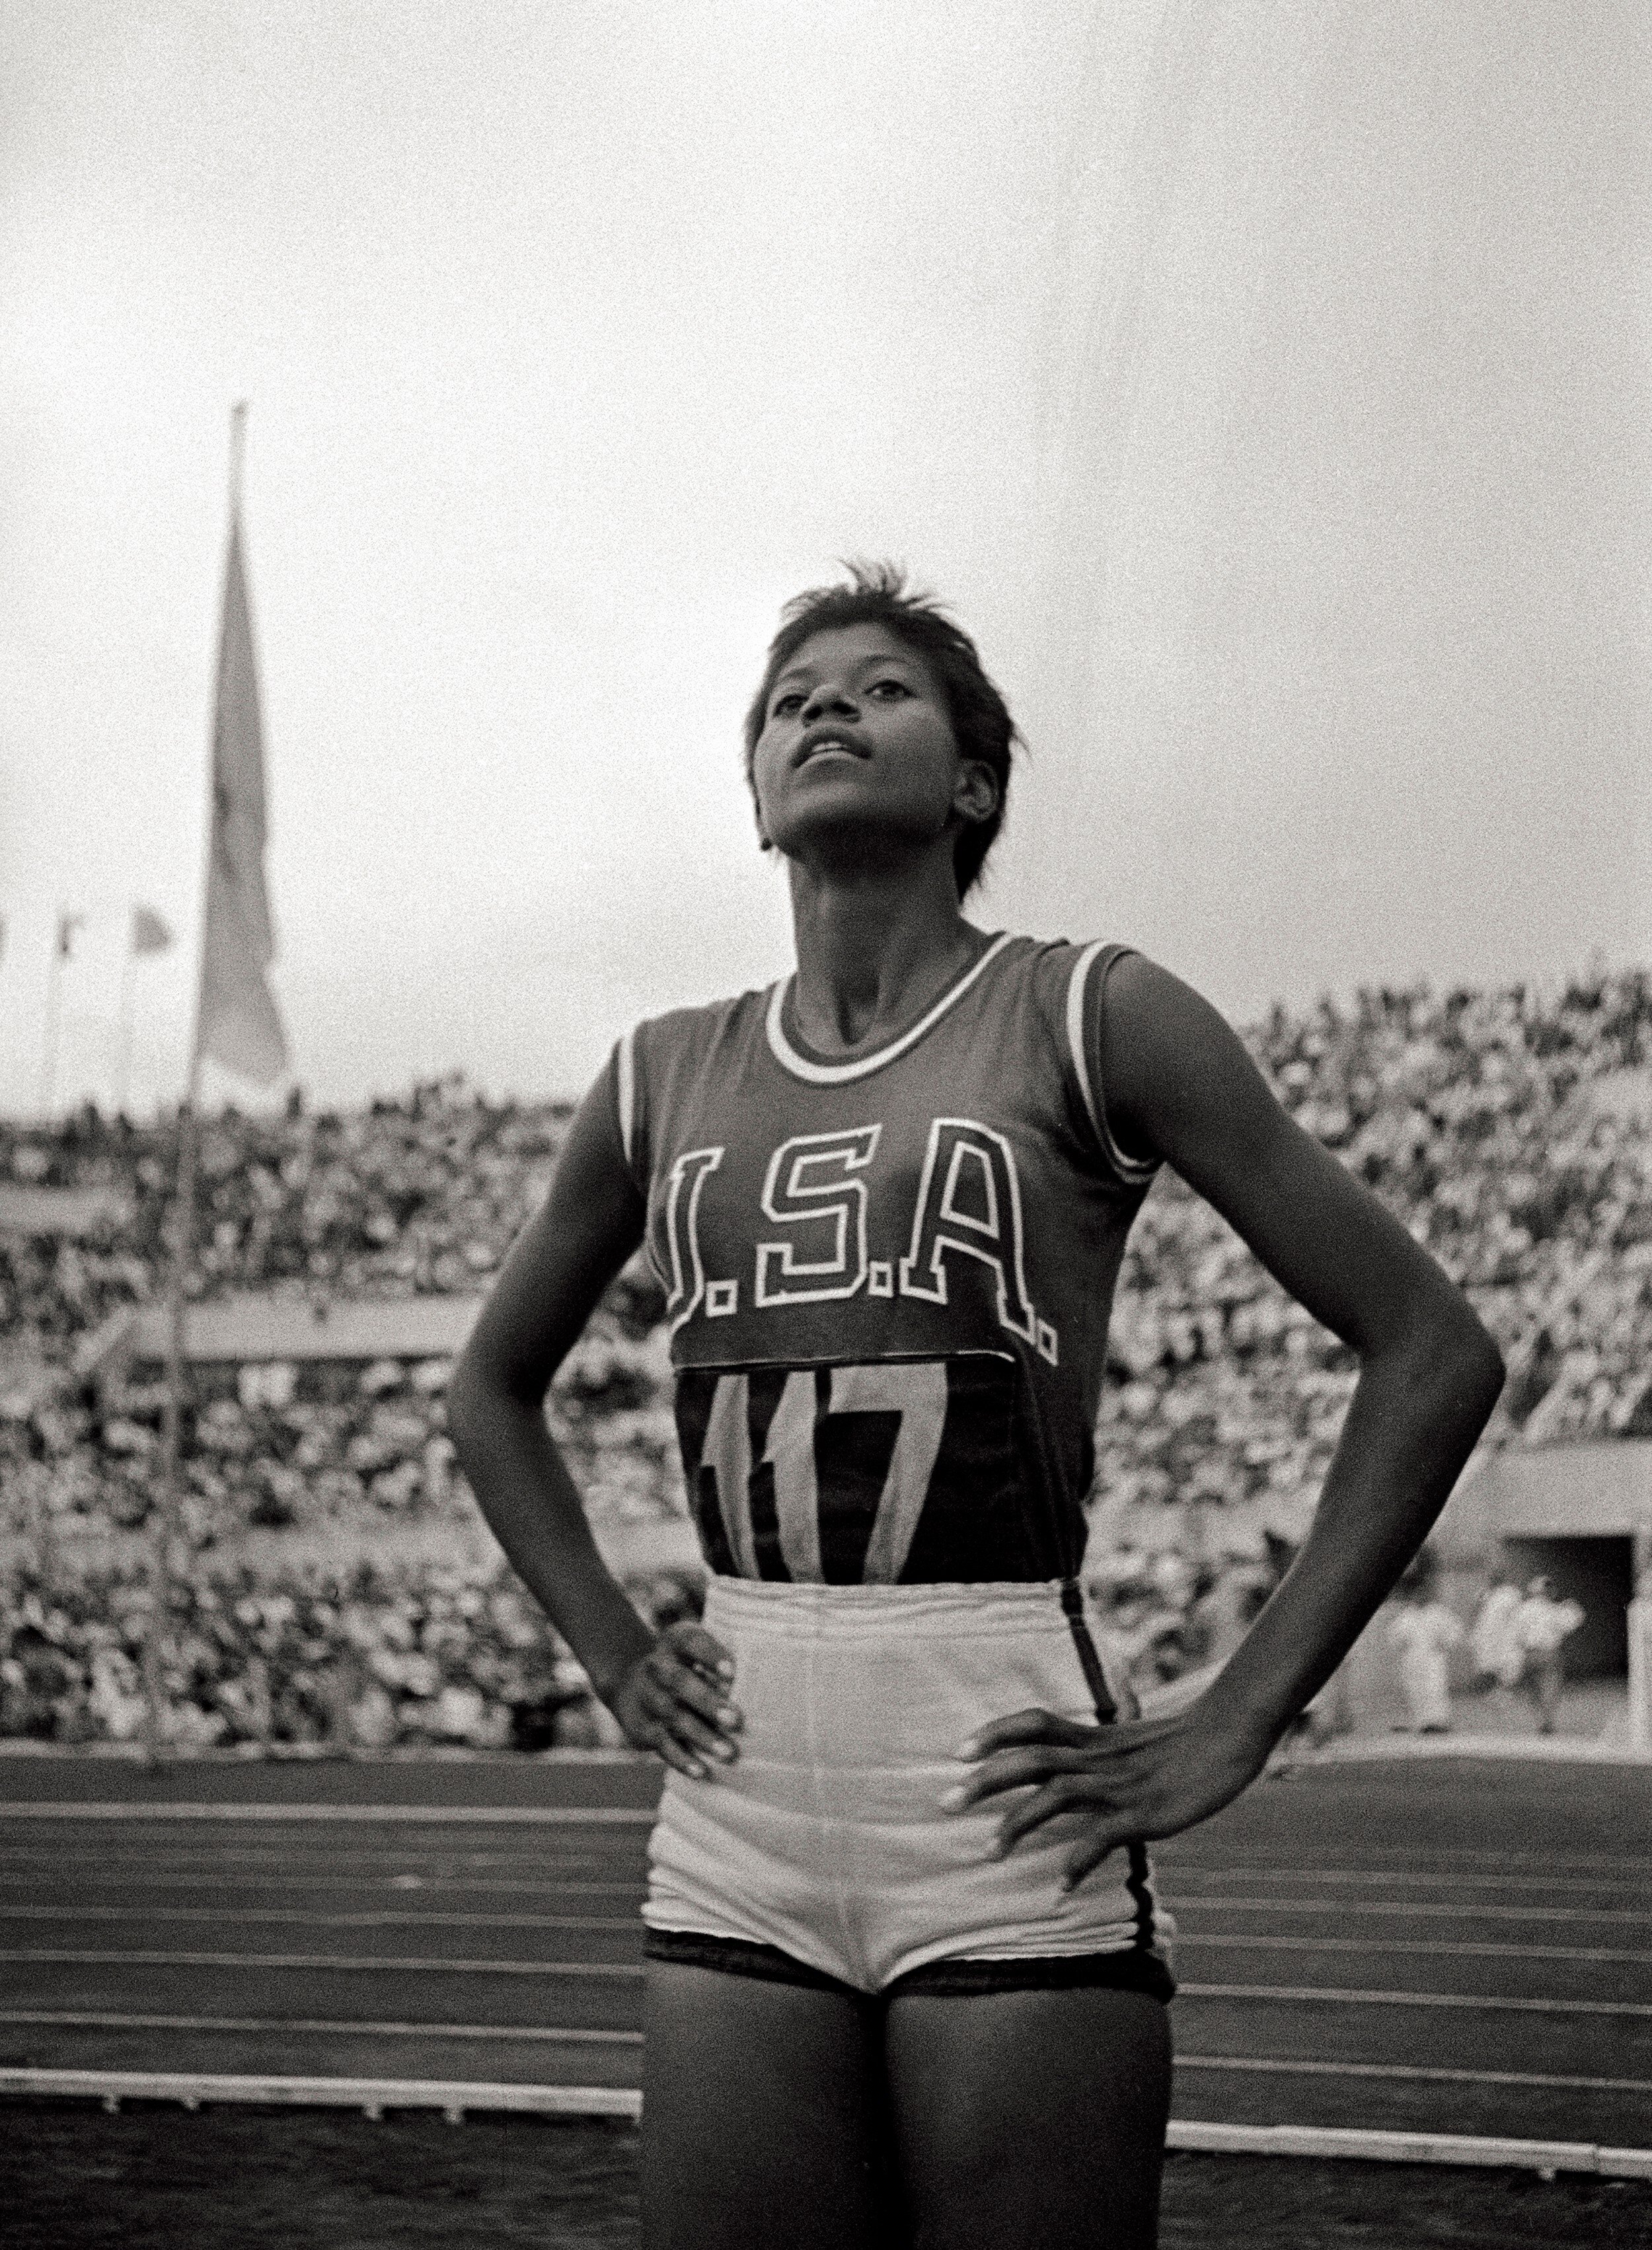 Wilma Rudolph standing with hands on hips